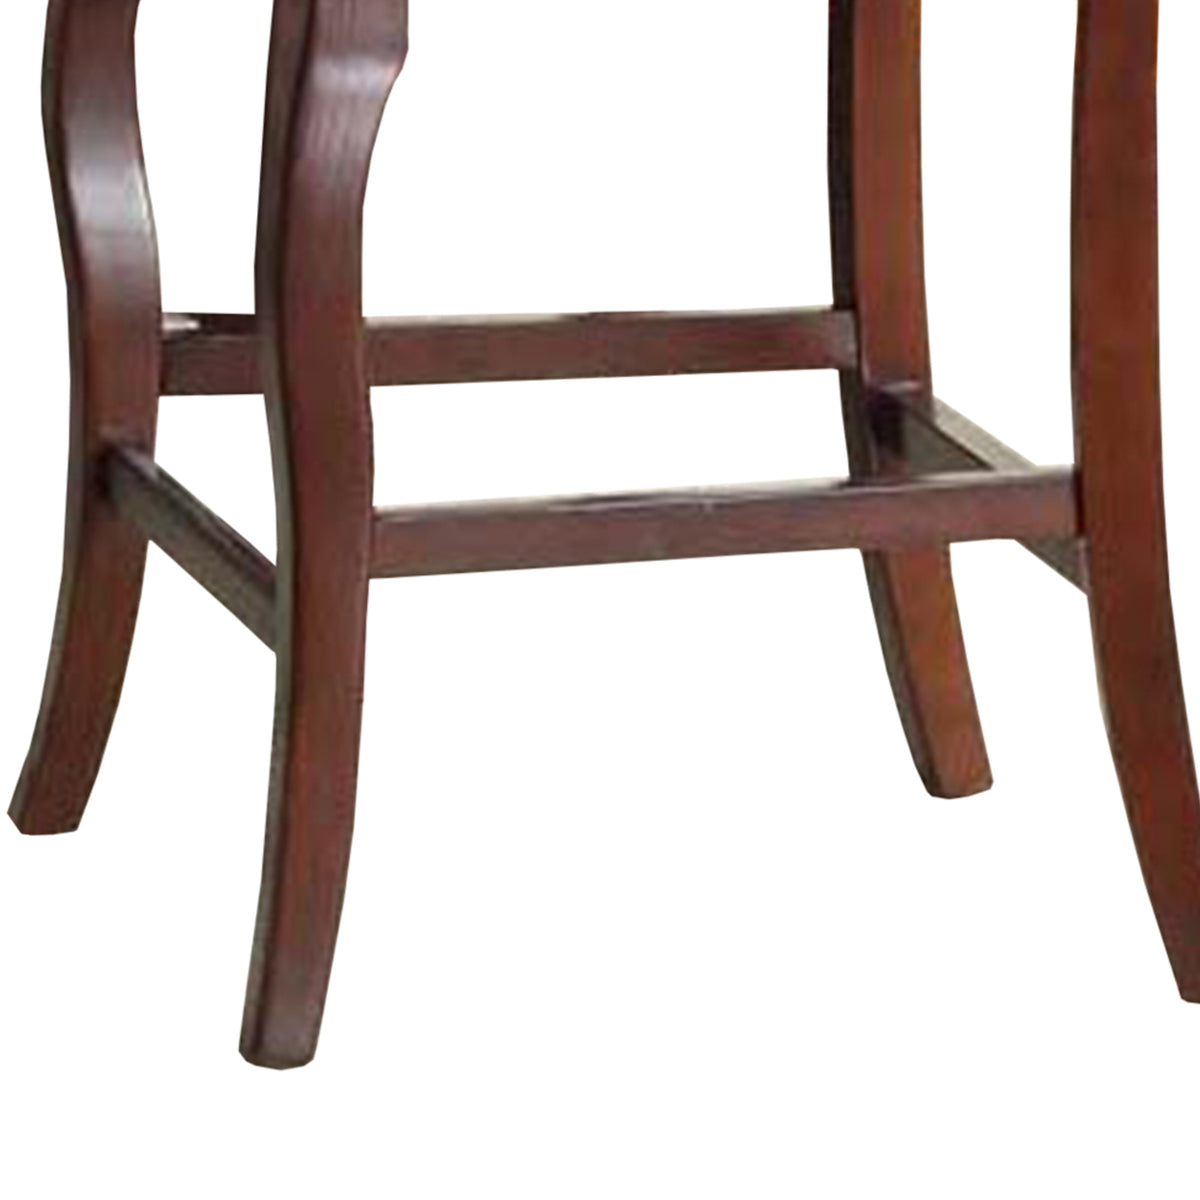 BM170302 Wooden Counter Height Pub Chair, Set of 2, Brown